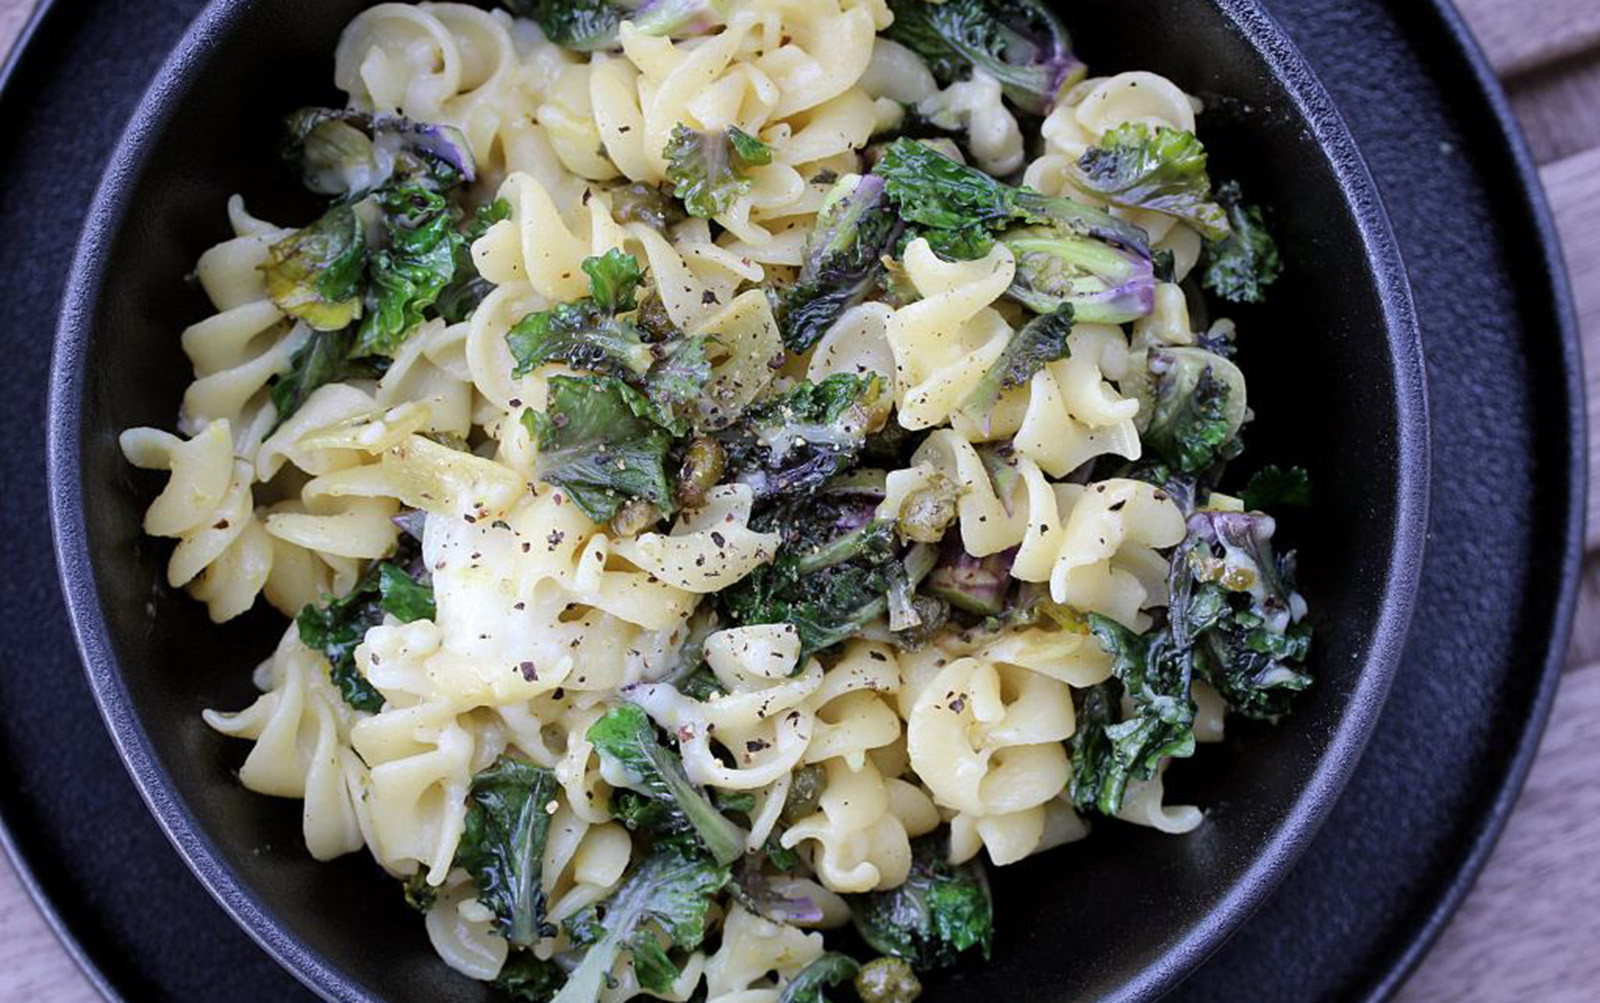 Capers Recipes Vegetarian
 Pasta With Capers and Greens [Vegan Gluten Free] e